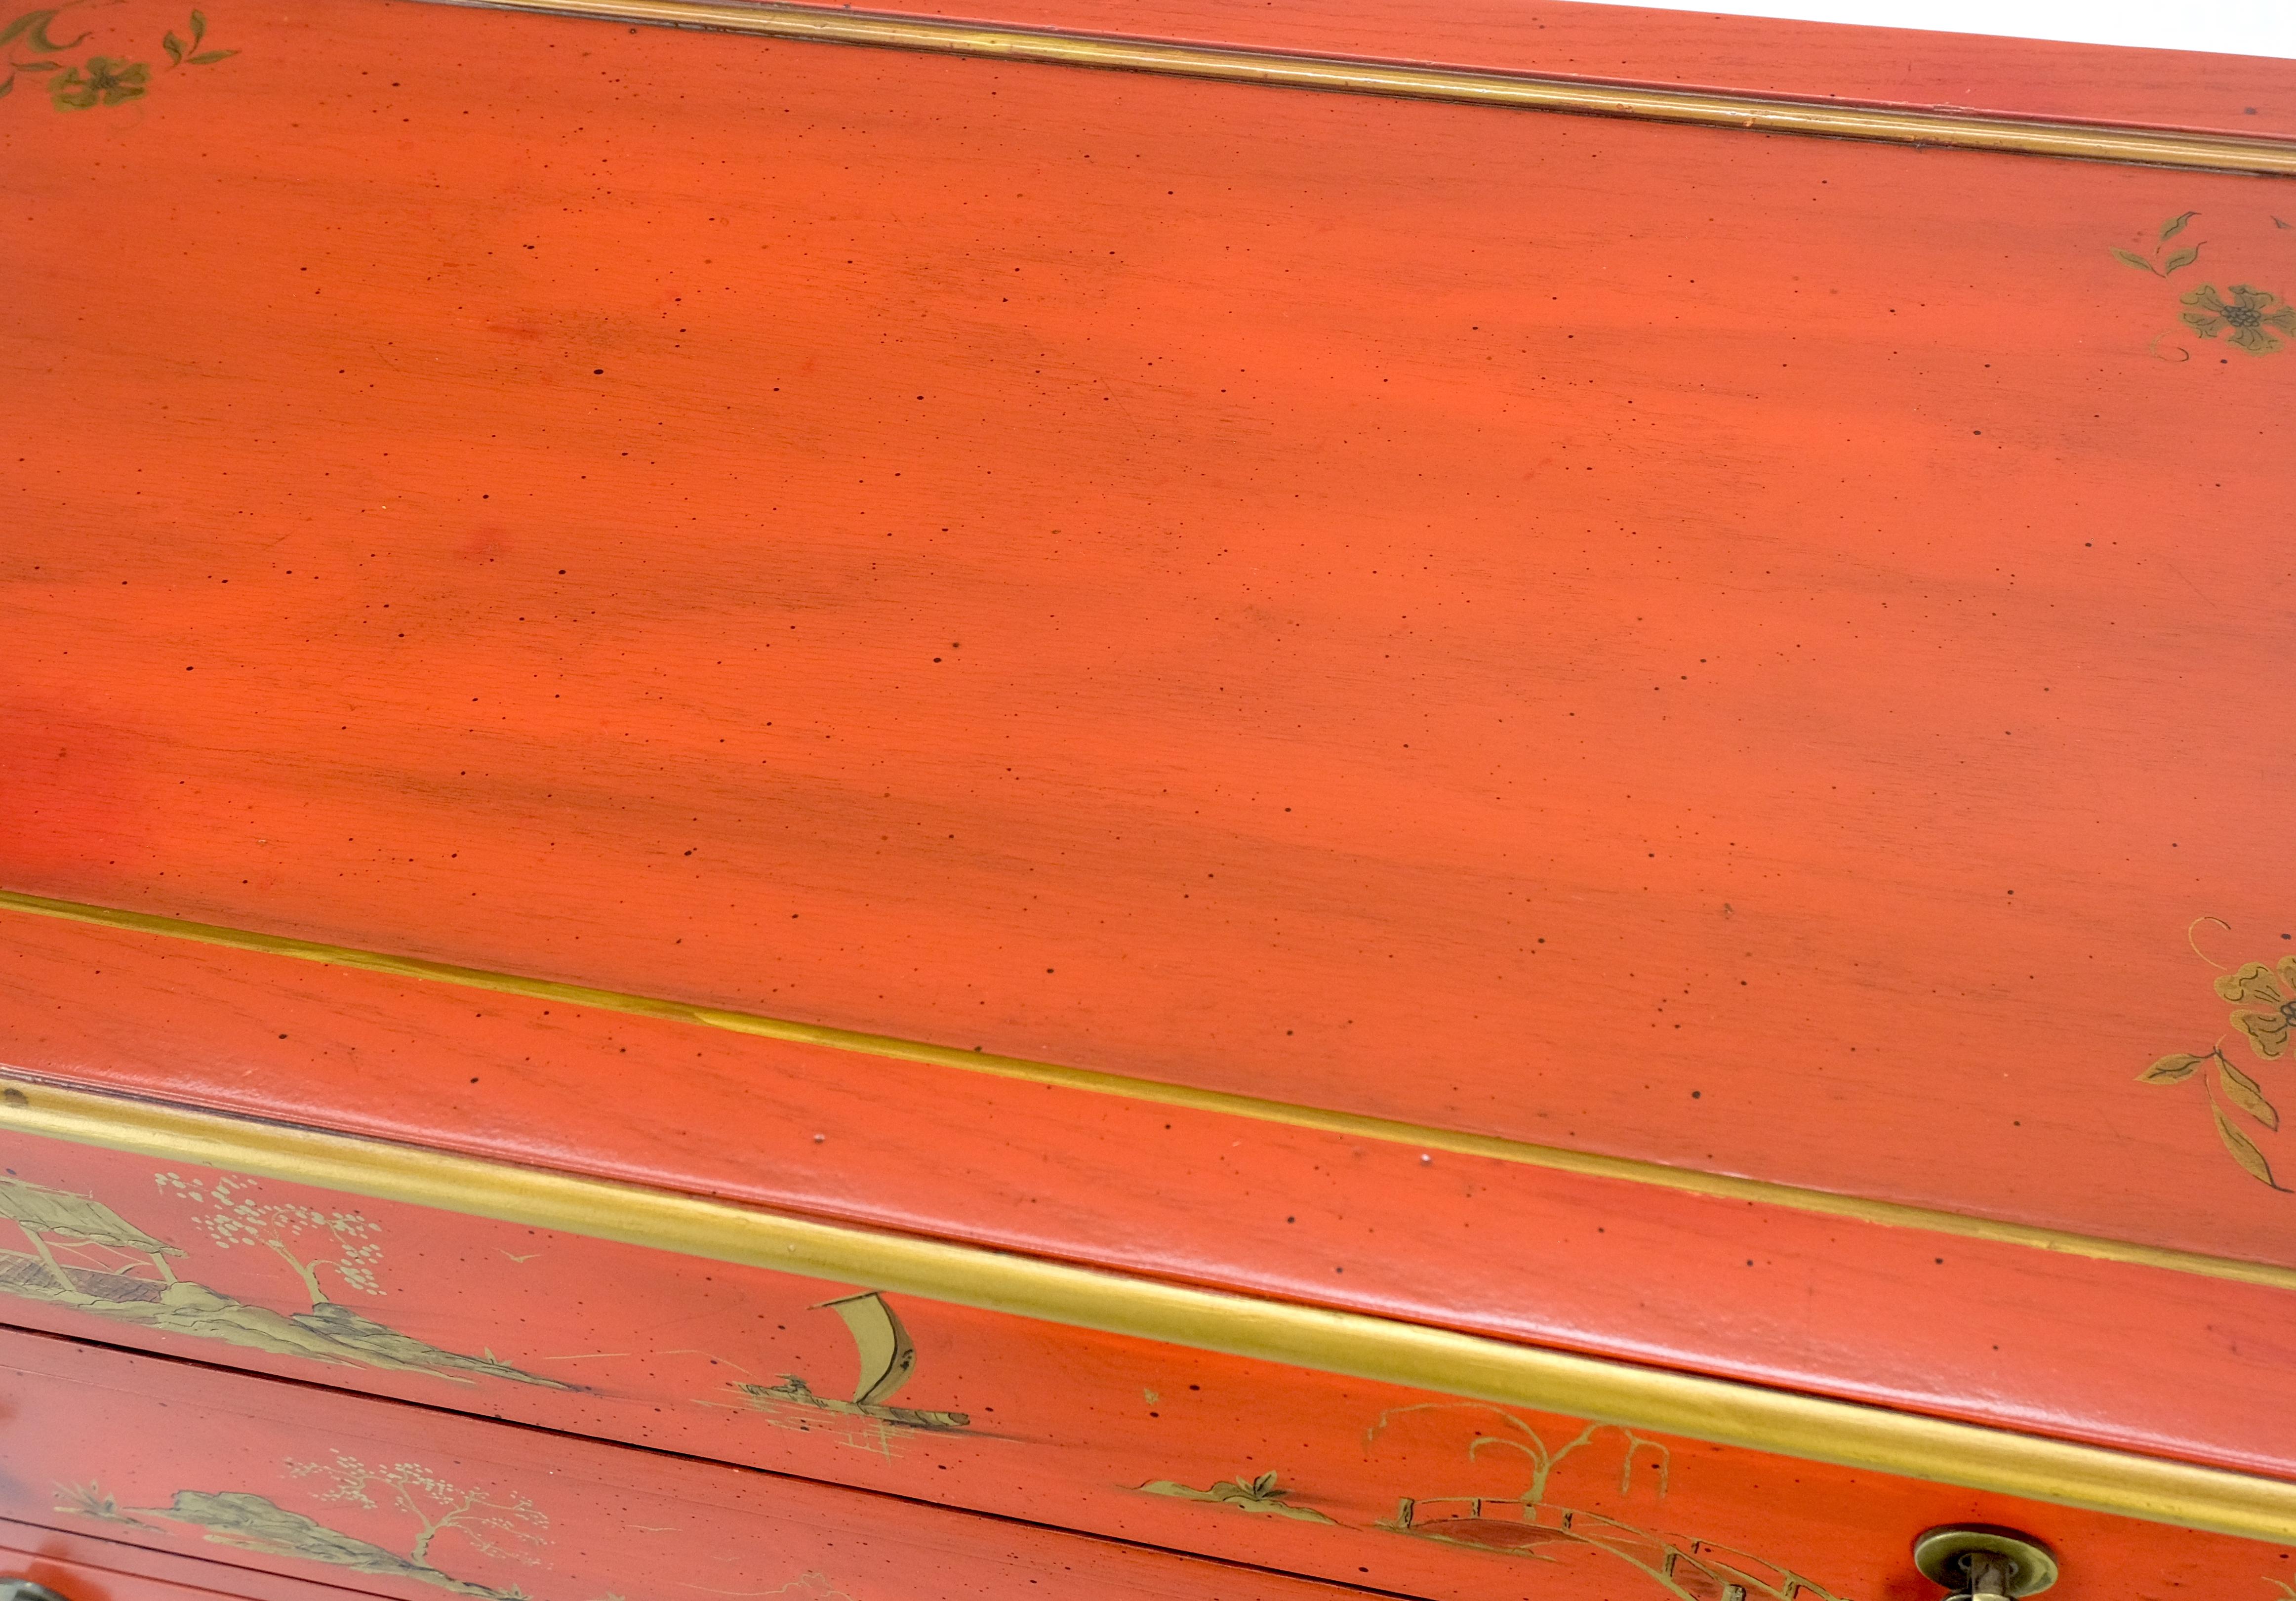 Lacquered Red Orange Lacquer Chinoiserie Hand Painted Three Drawers Dresser Large Stand  For Sale